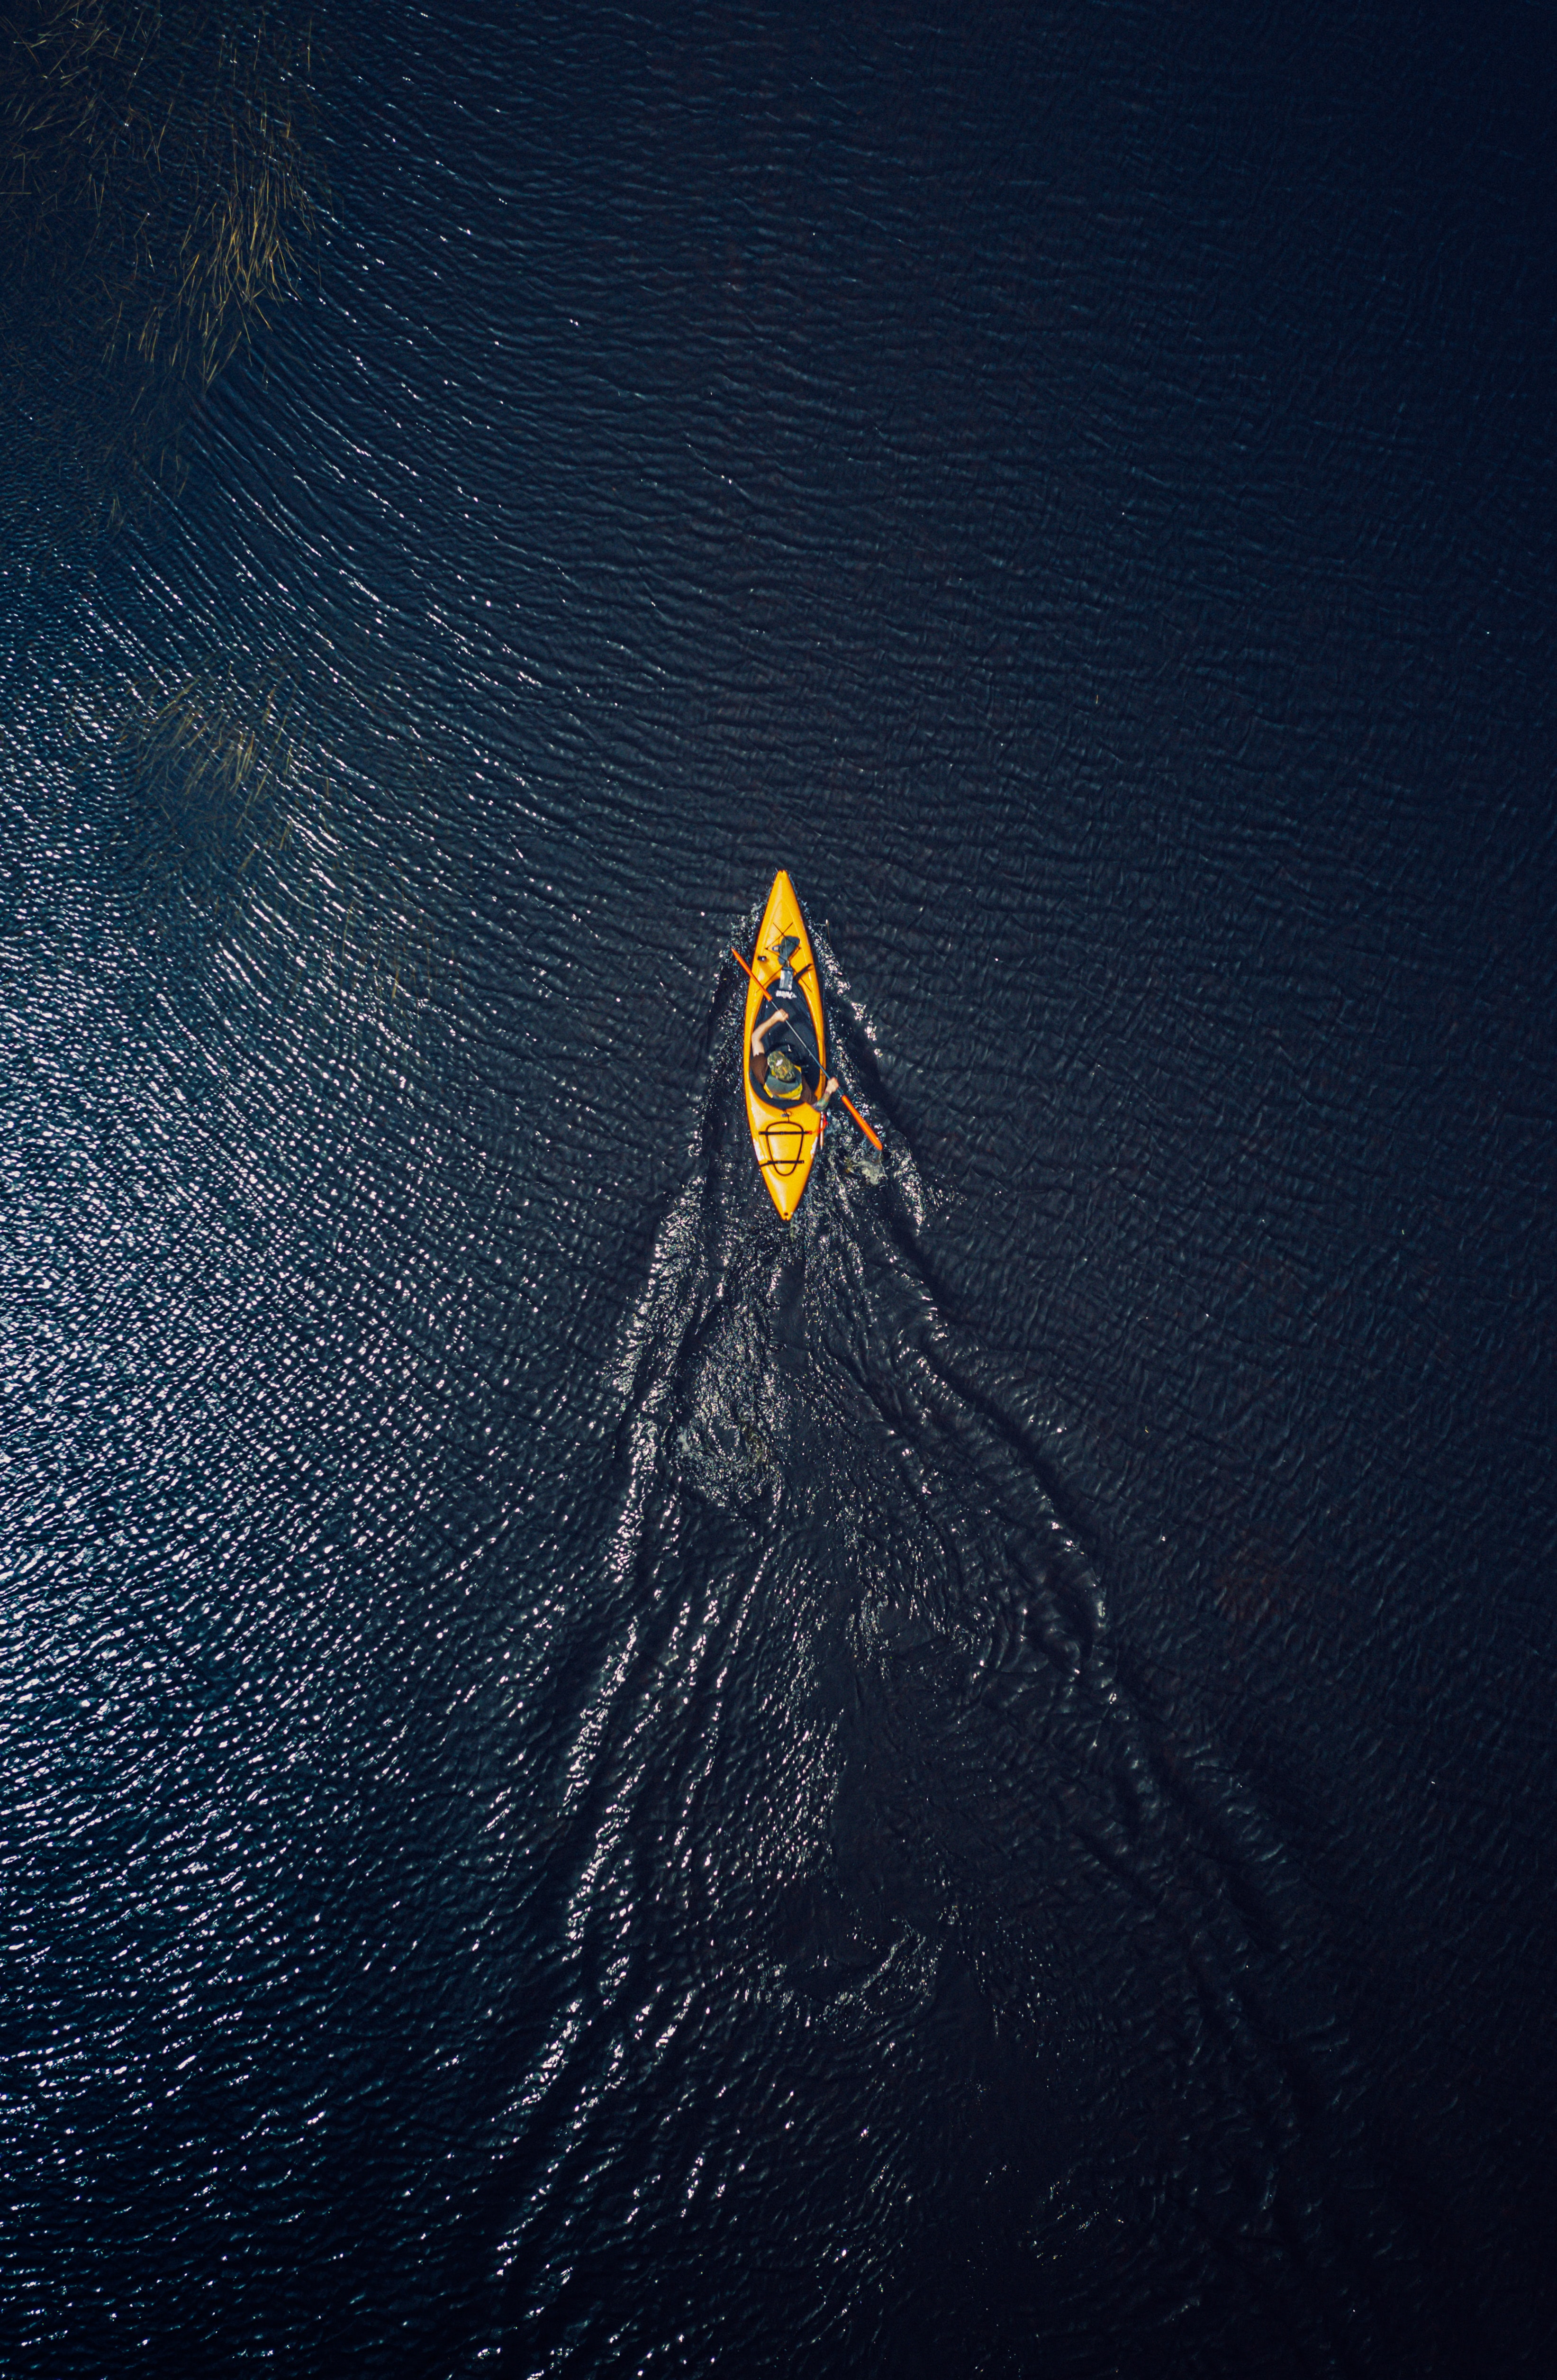 vertical wallpaper boat, view from above, water, miscellanea, miscellaneous, ocean, canoe